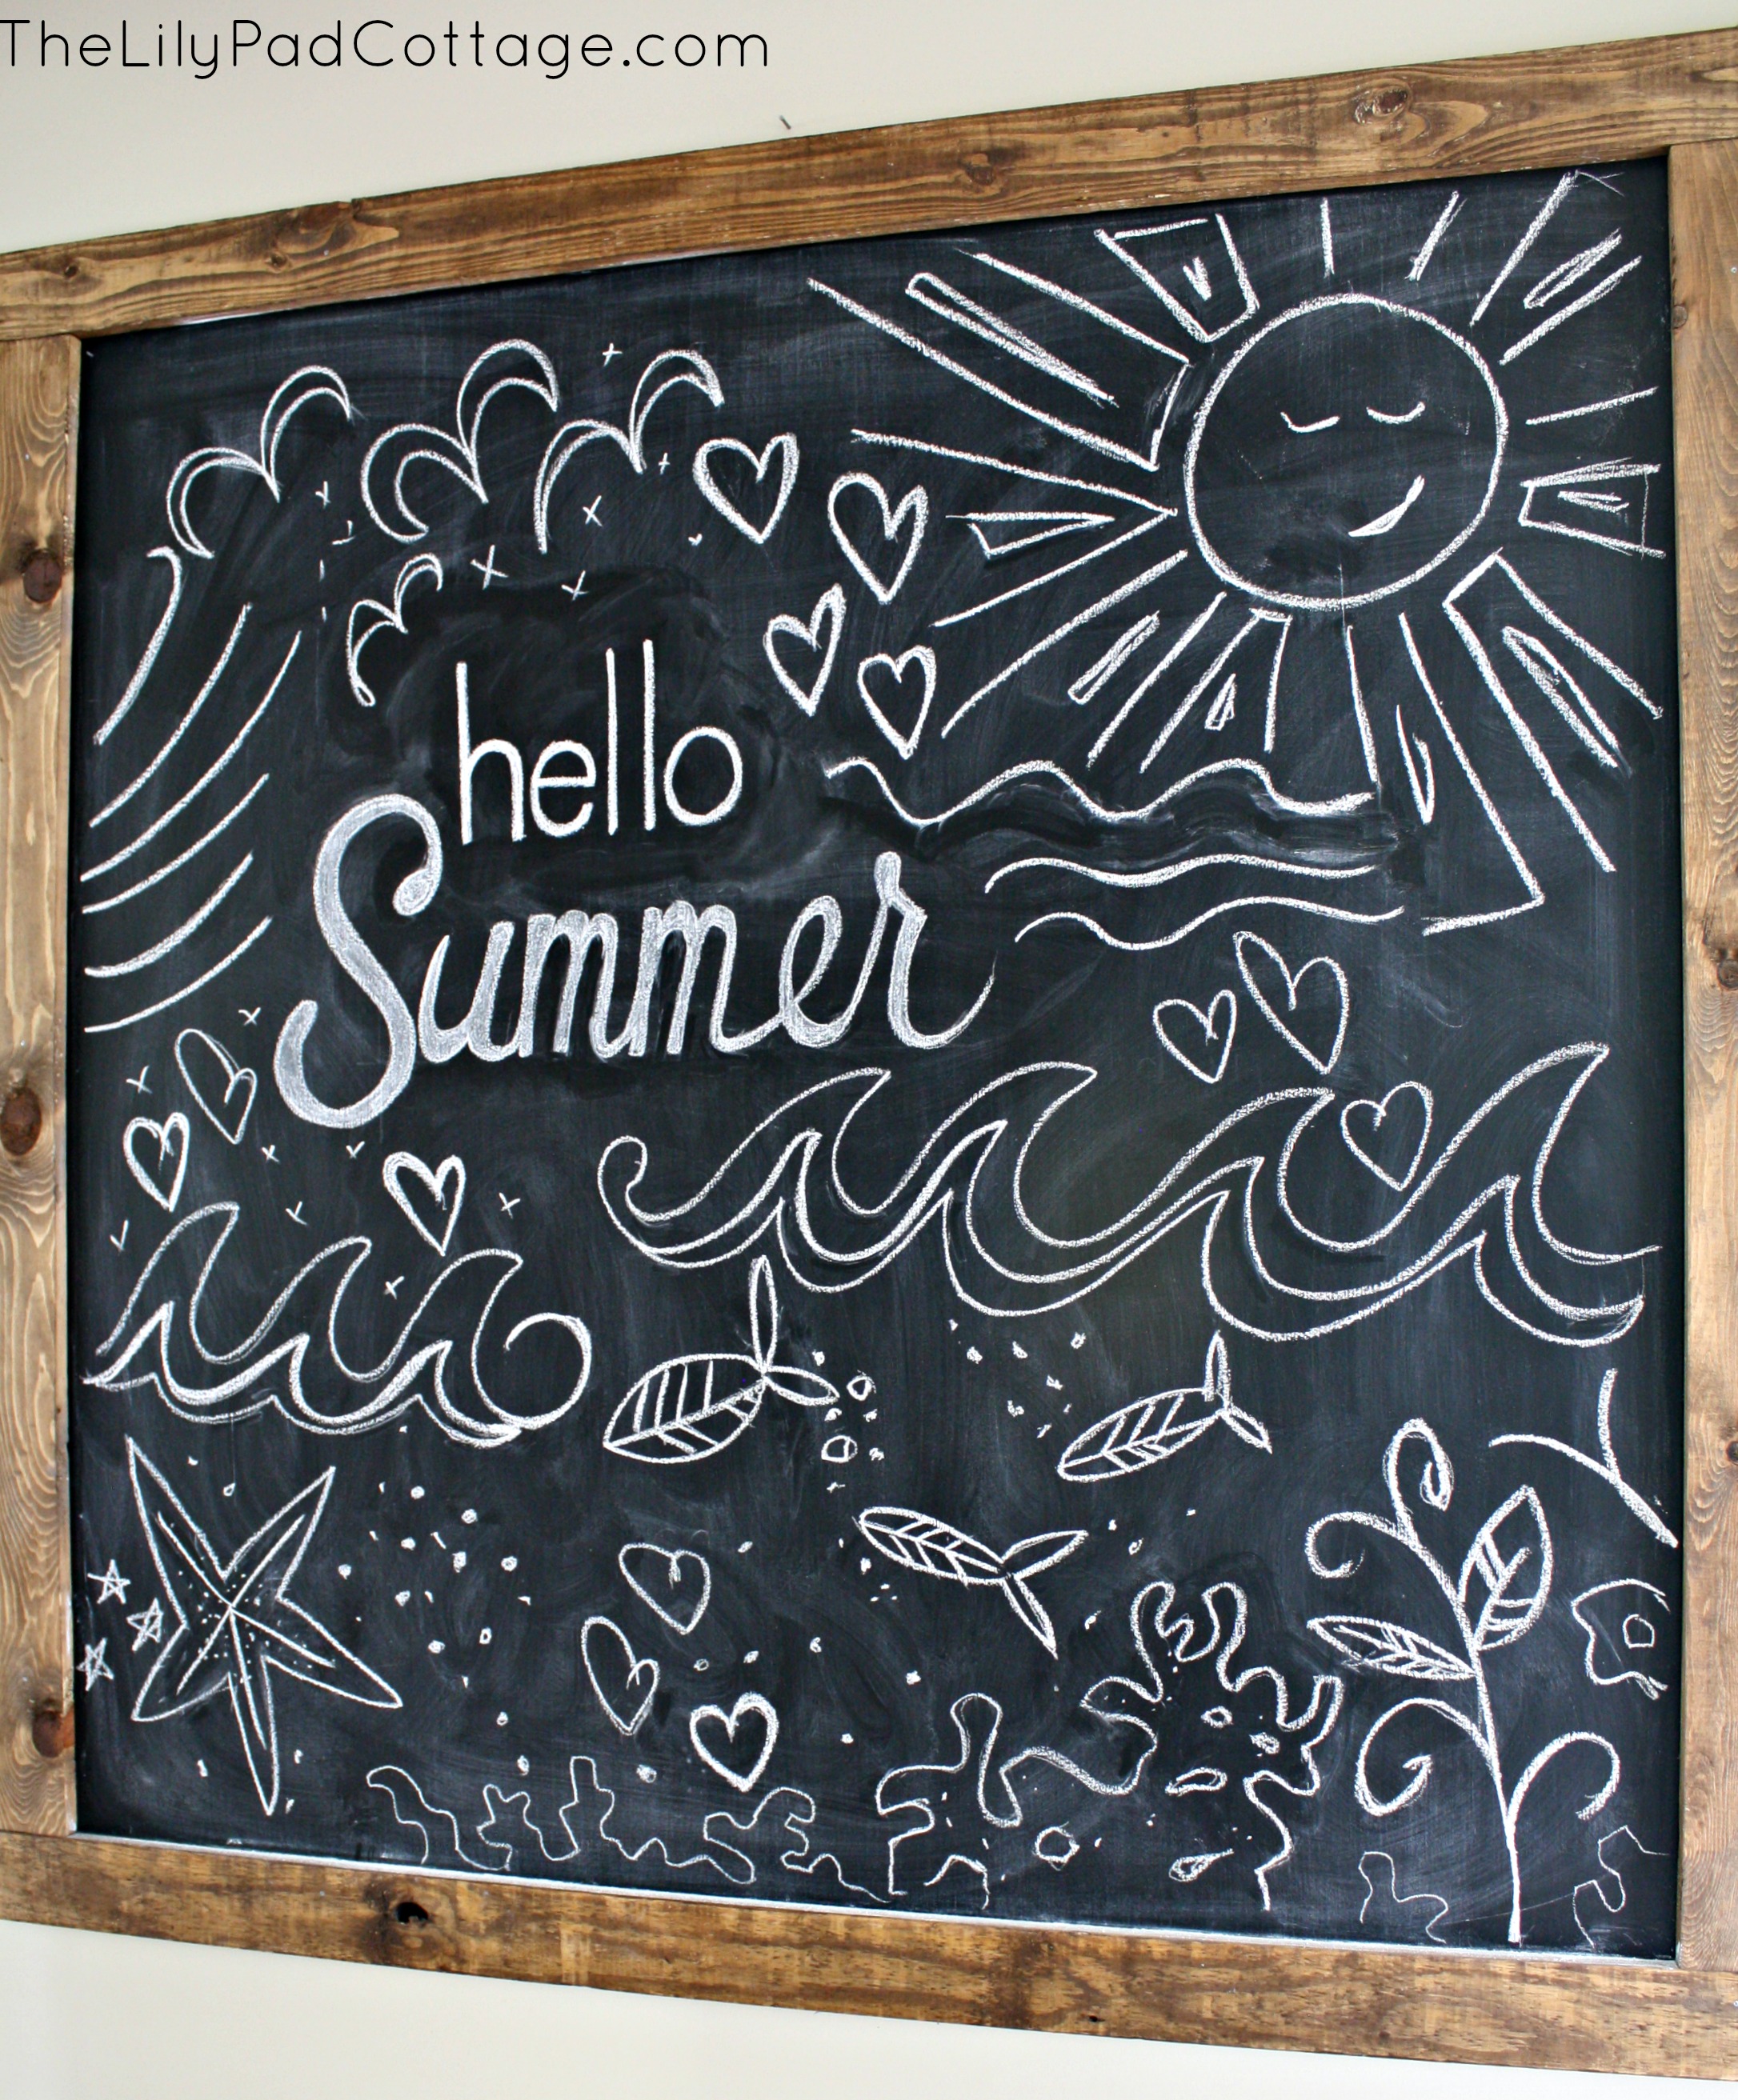 Summer Chalkboard Quotes.